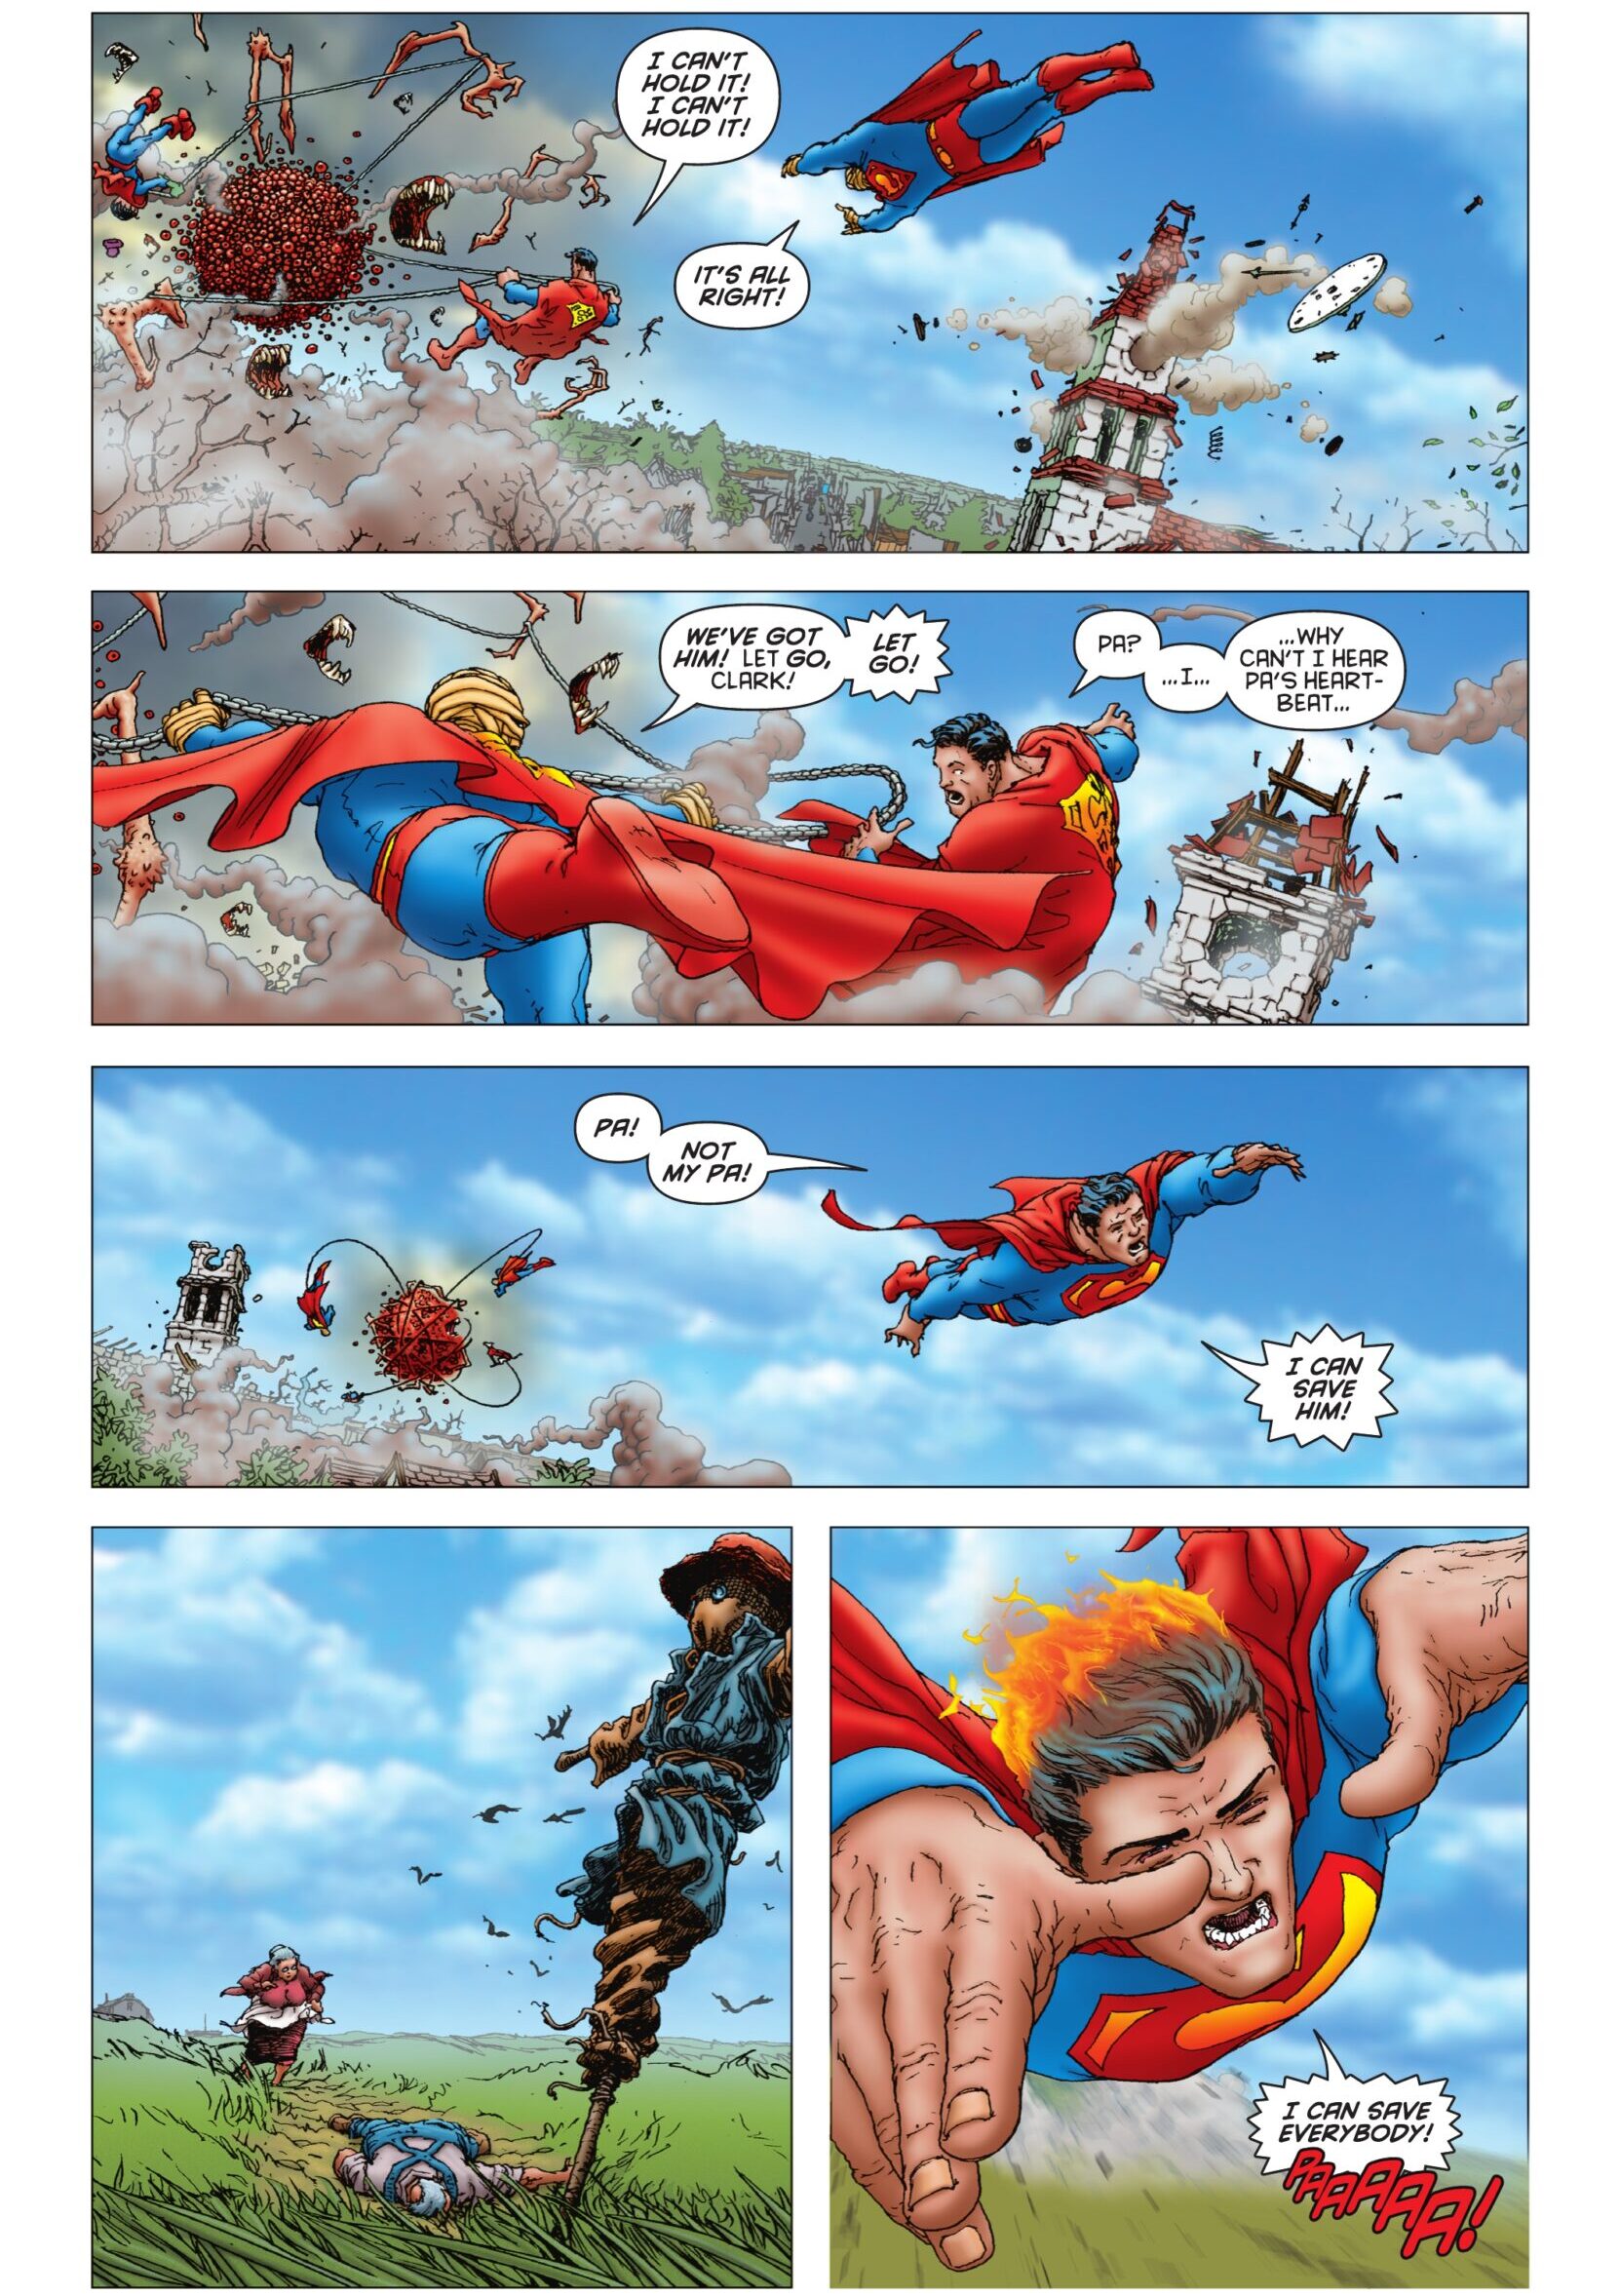 Superman learns his own limitations in All-Star Superman Vol. 1 #6 "Funeral in Smallville" (2007), DC. Words by Grant Morrison, art by Frank Quitely, Jamie Grant, and Phil Balsman.